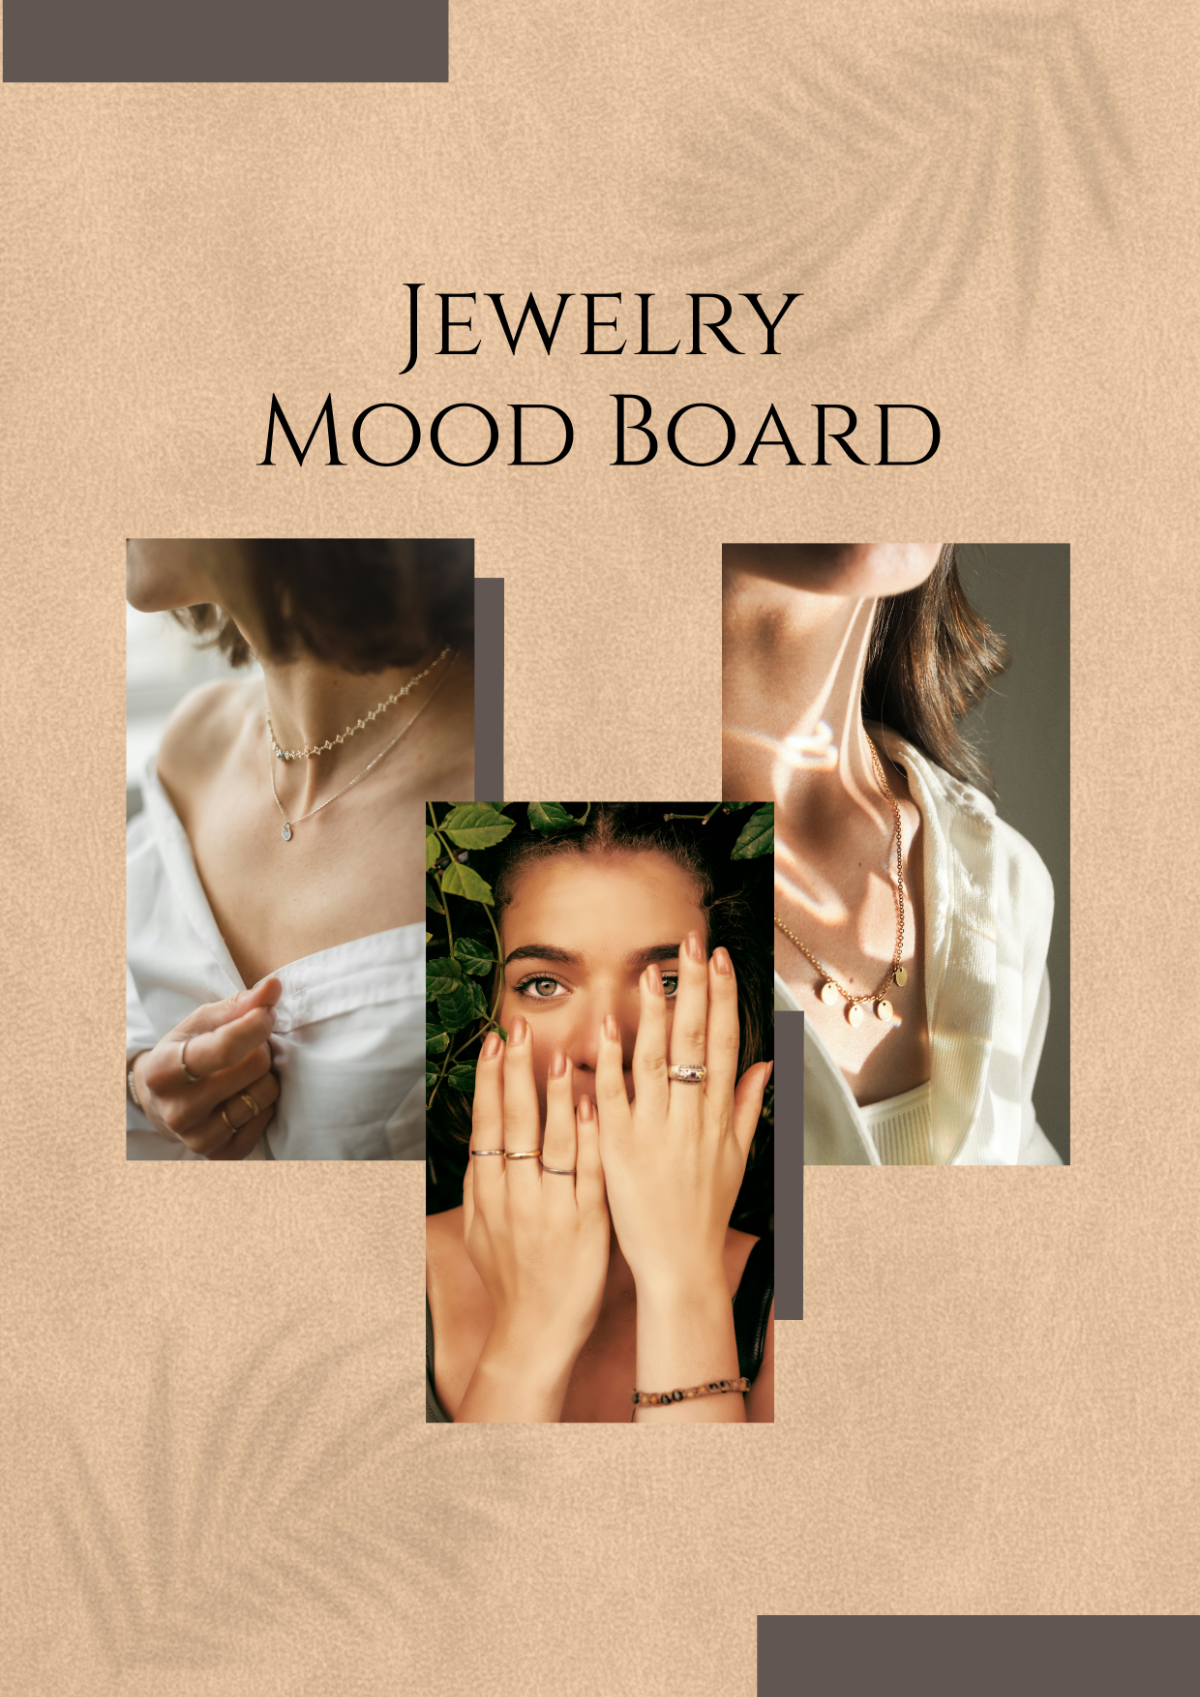 Free Jewelry Mood Boards Photo Collage Template